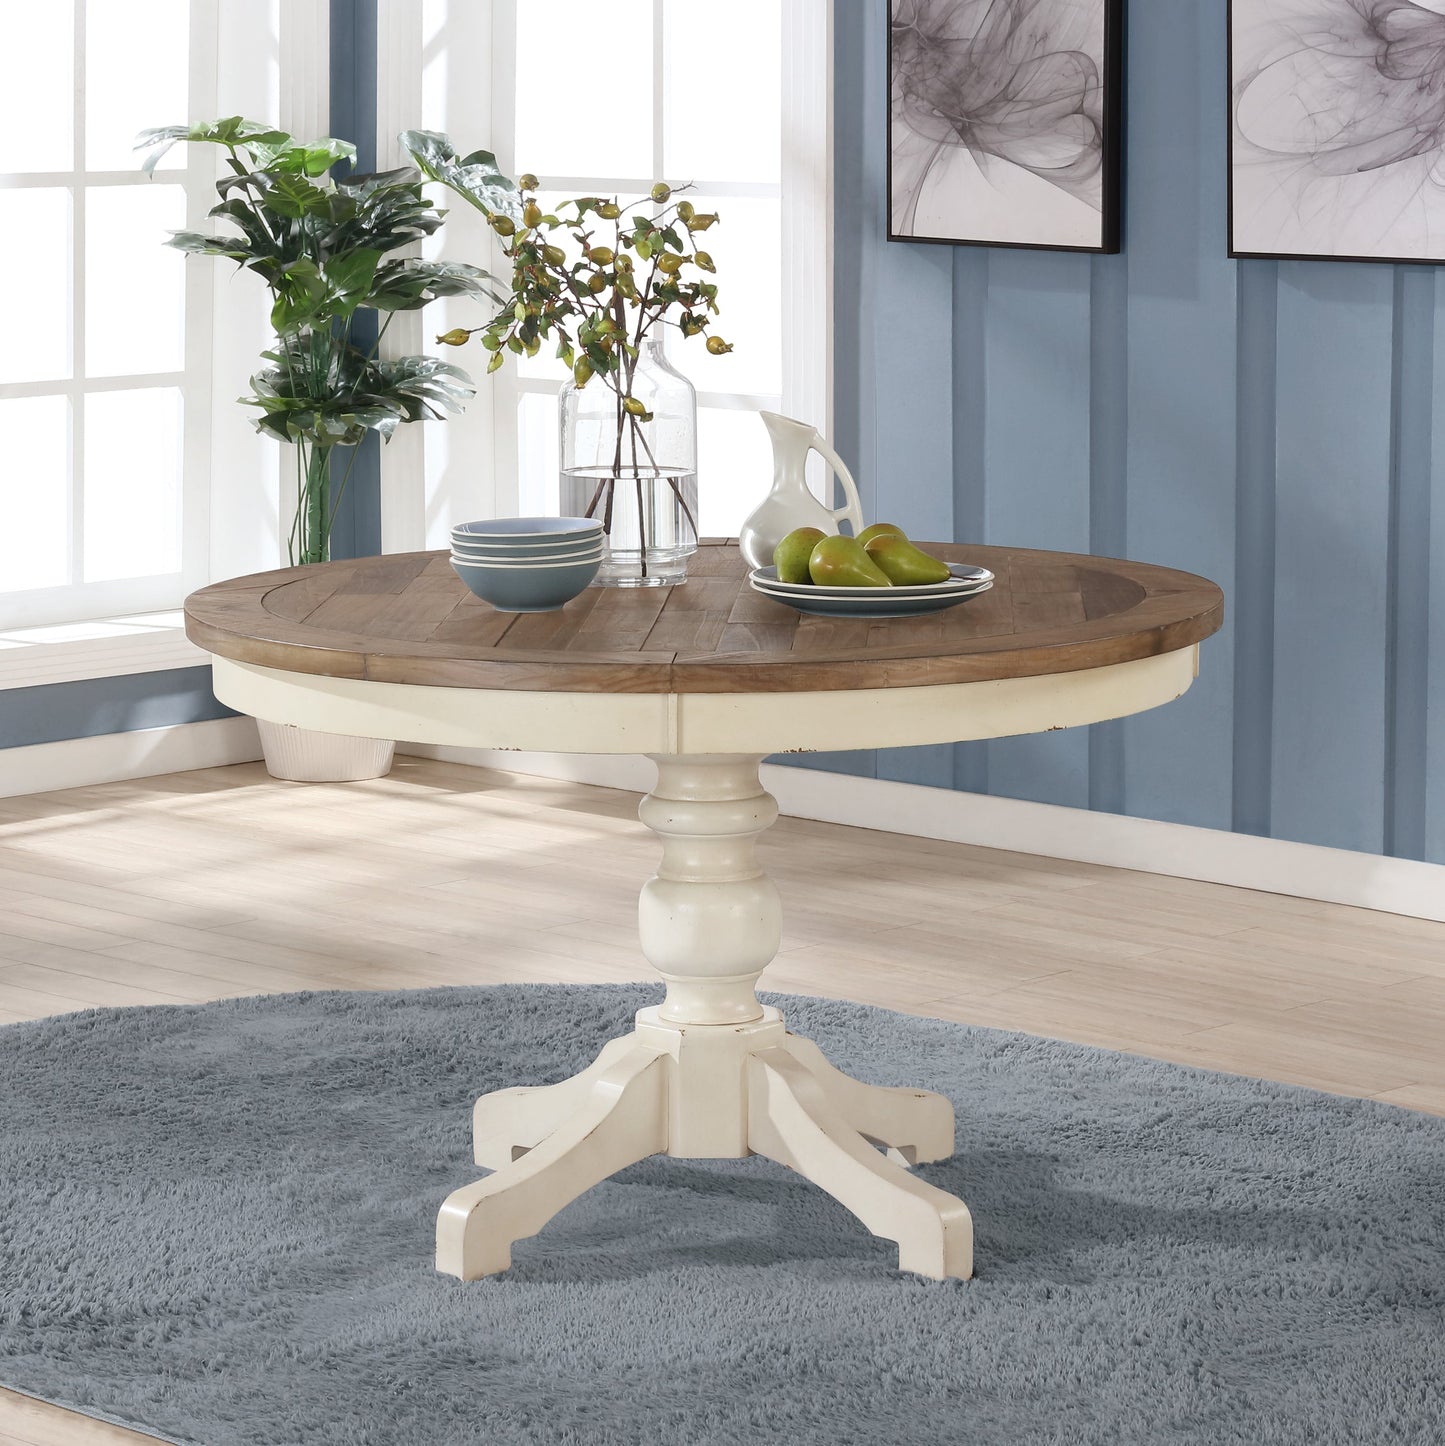 Prato Round Antique White and Distressed Oak Two-tone Finish Wood Dining Table